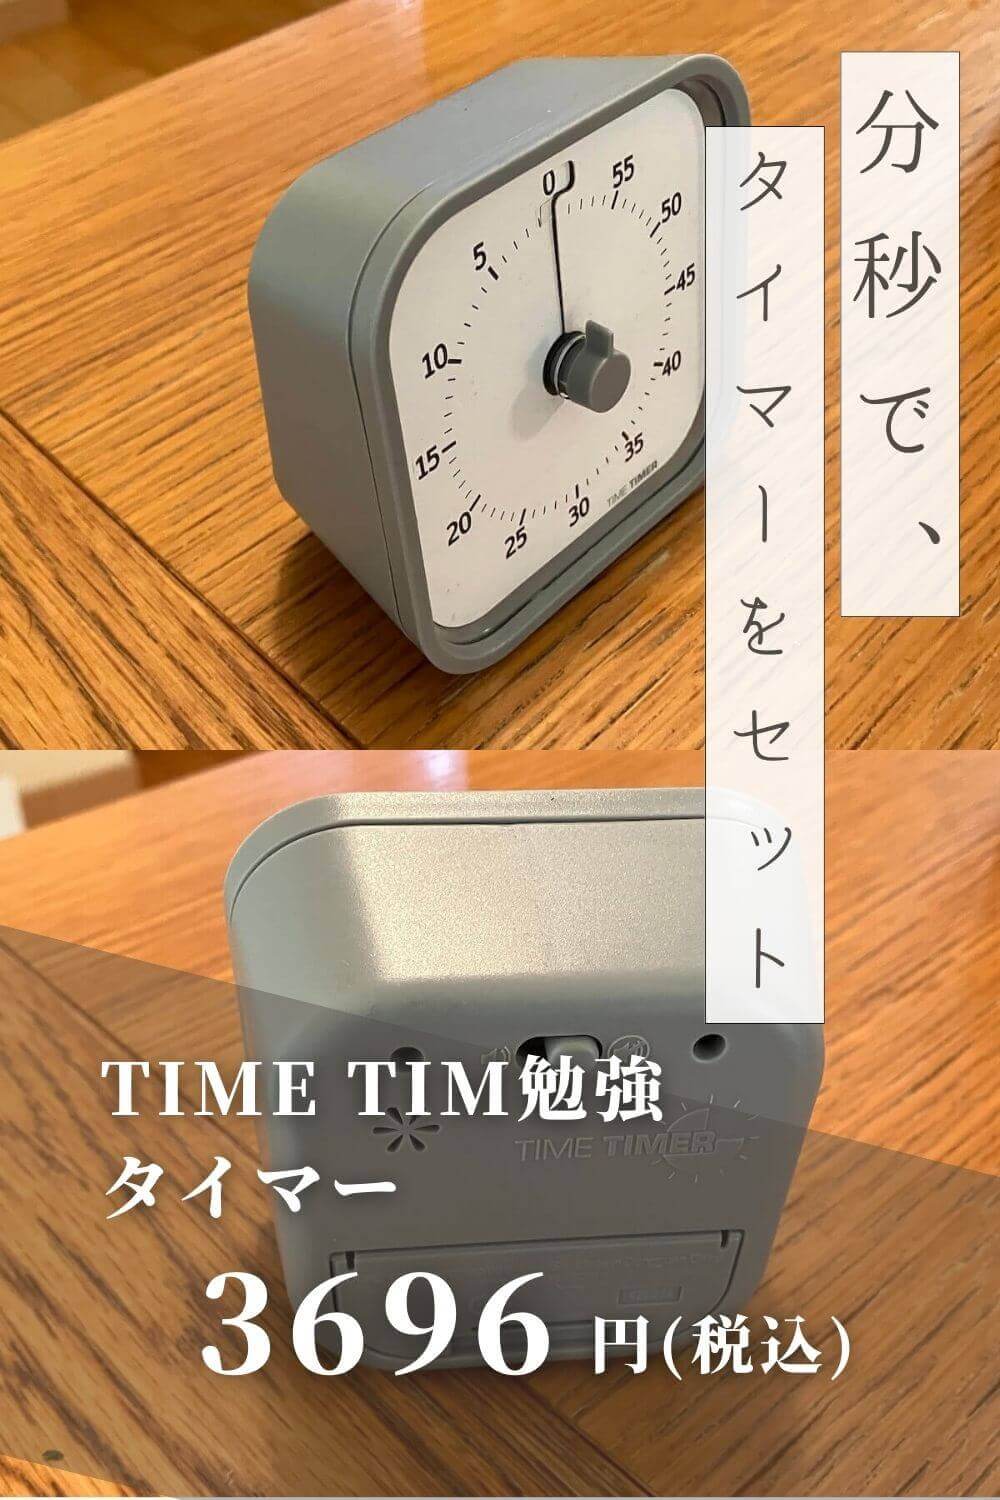 TIME TIMER) 勉強タイマー 